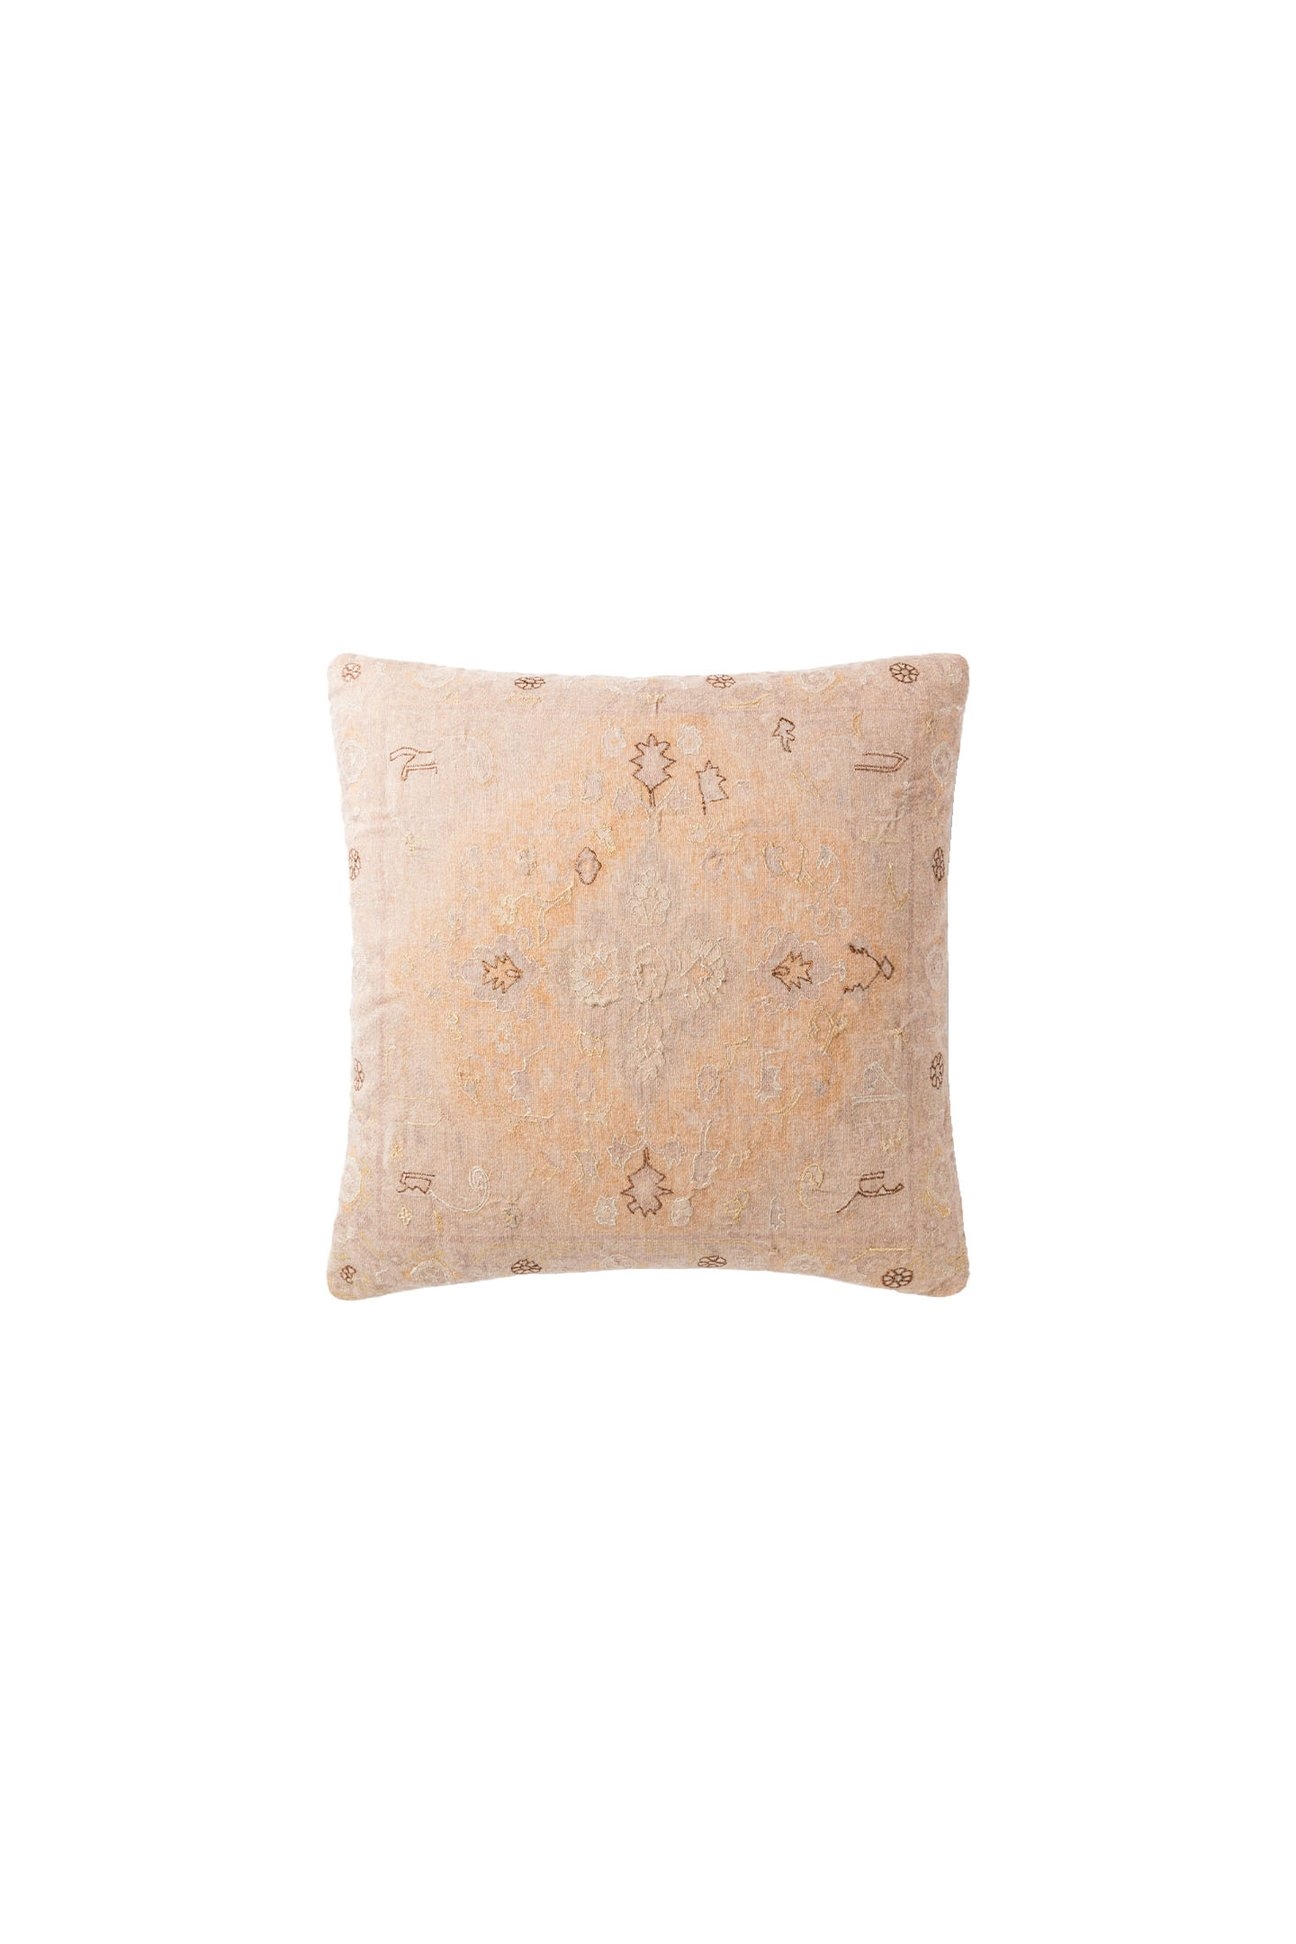 Mila Pillow Cover - Image 0